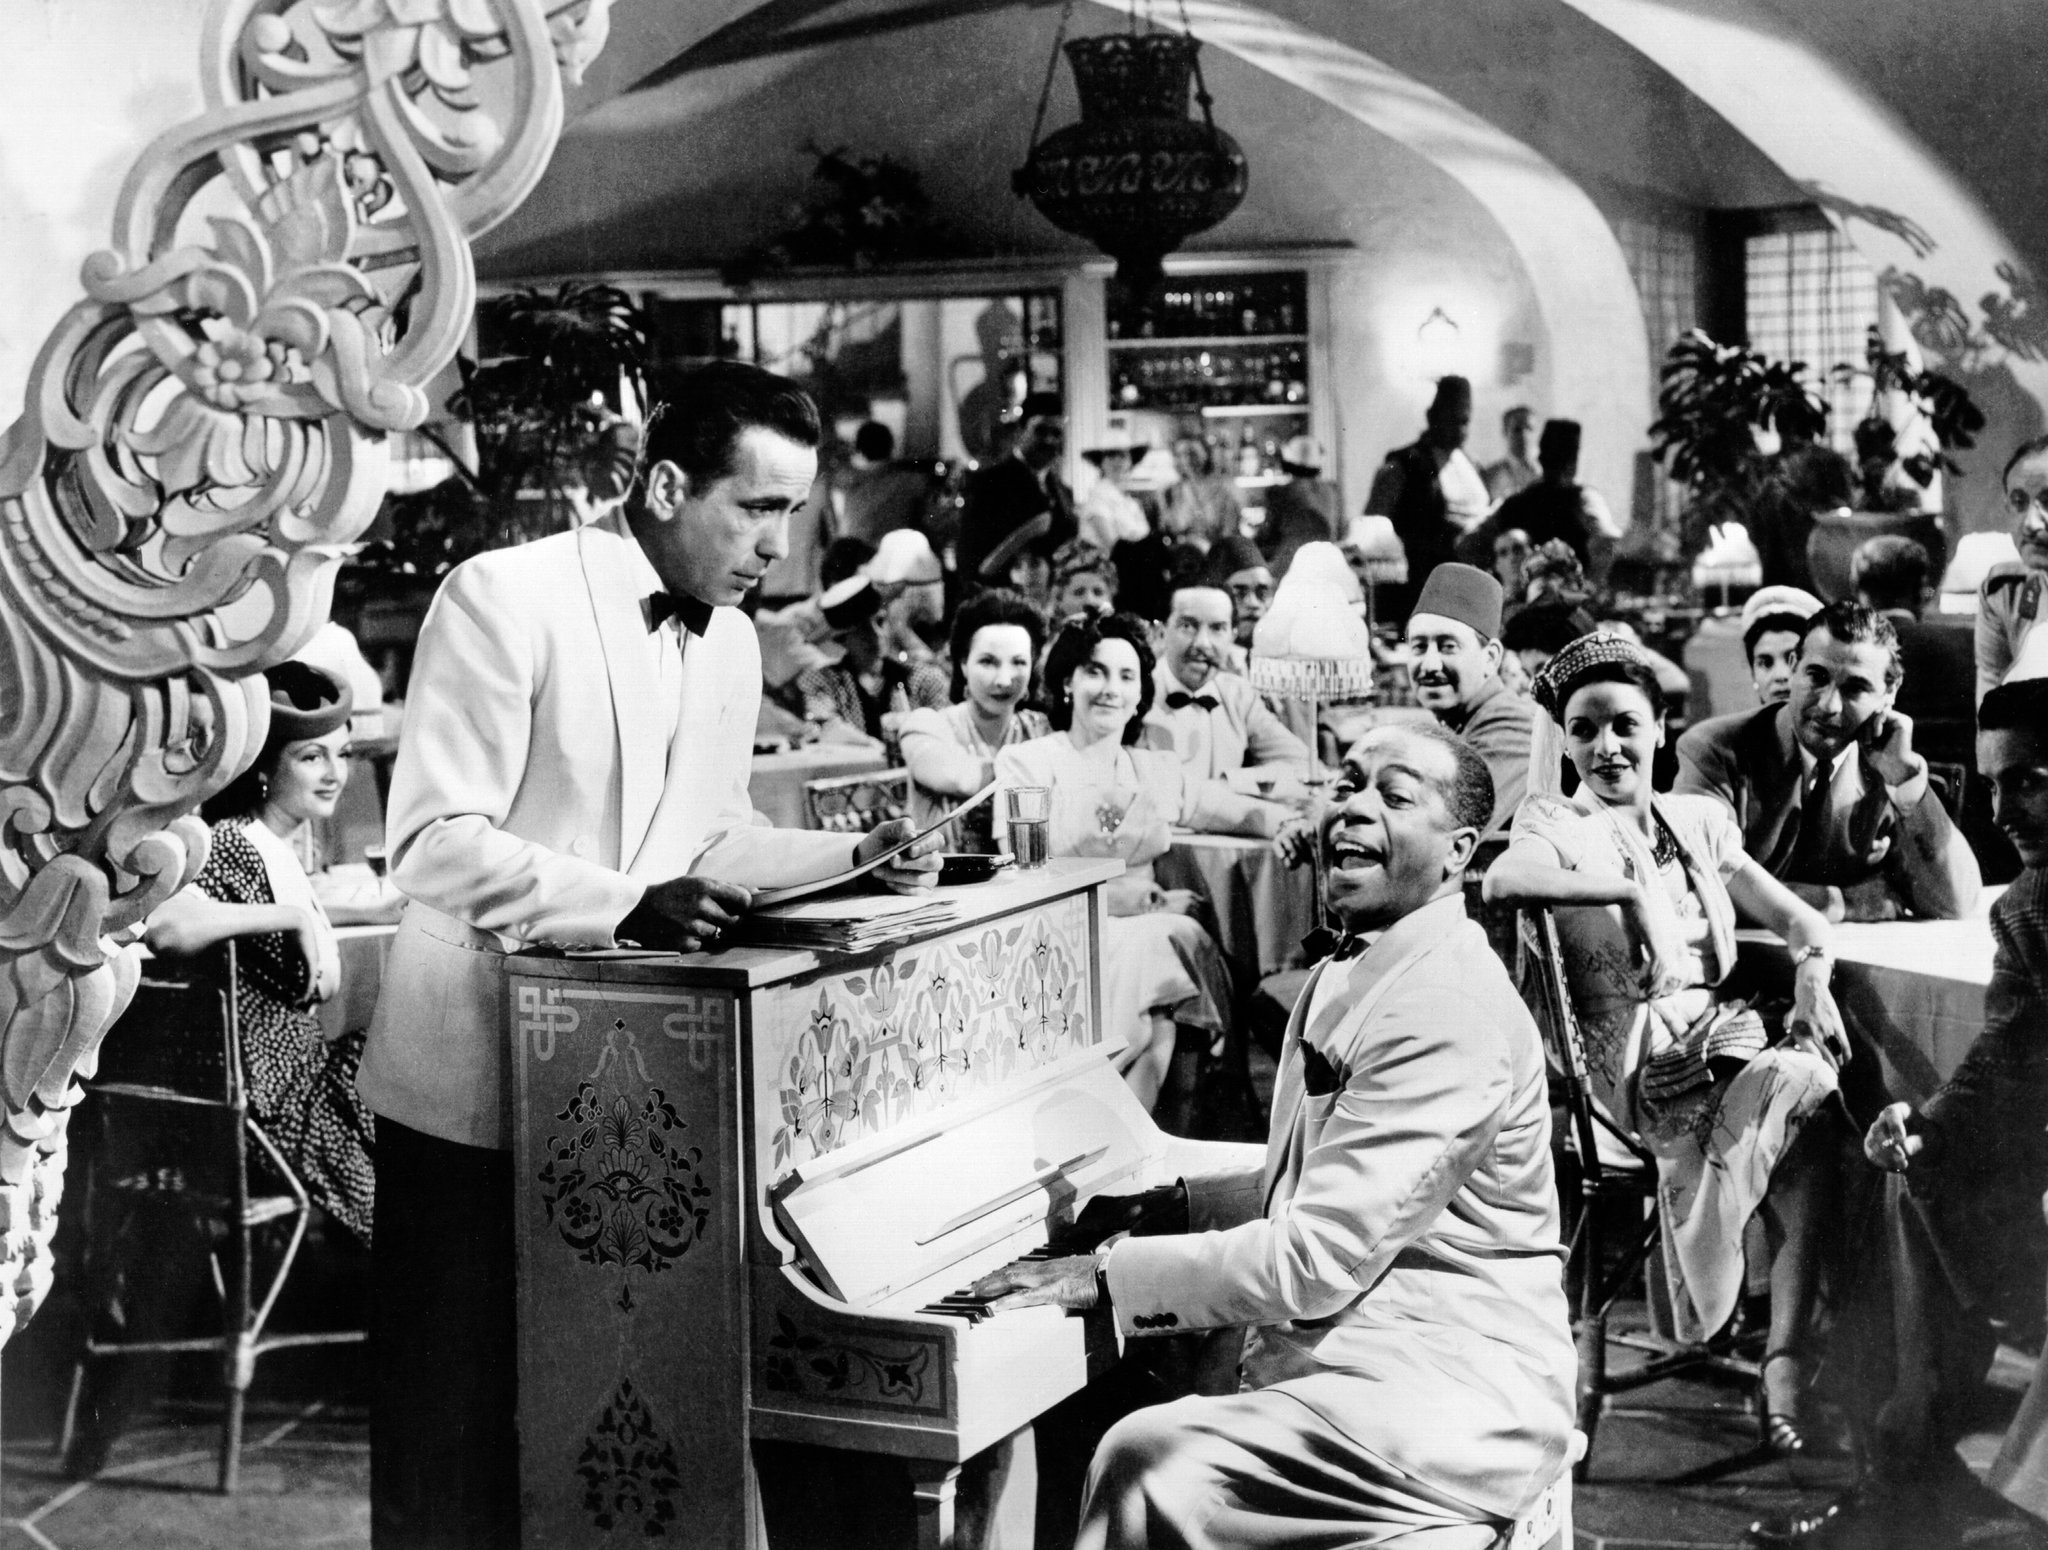 A scene from Casablanca showing Humphrey Bogart listening while Dooley Wilson, as Sam, plays the piano.